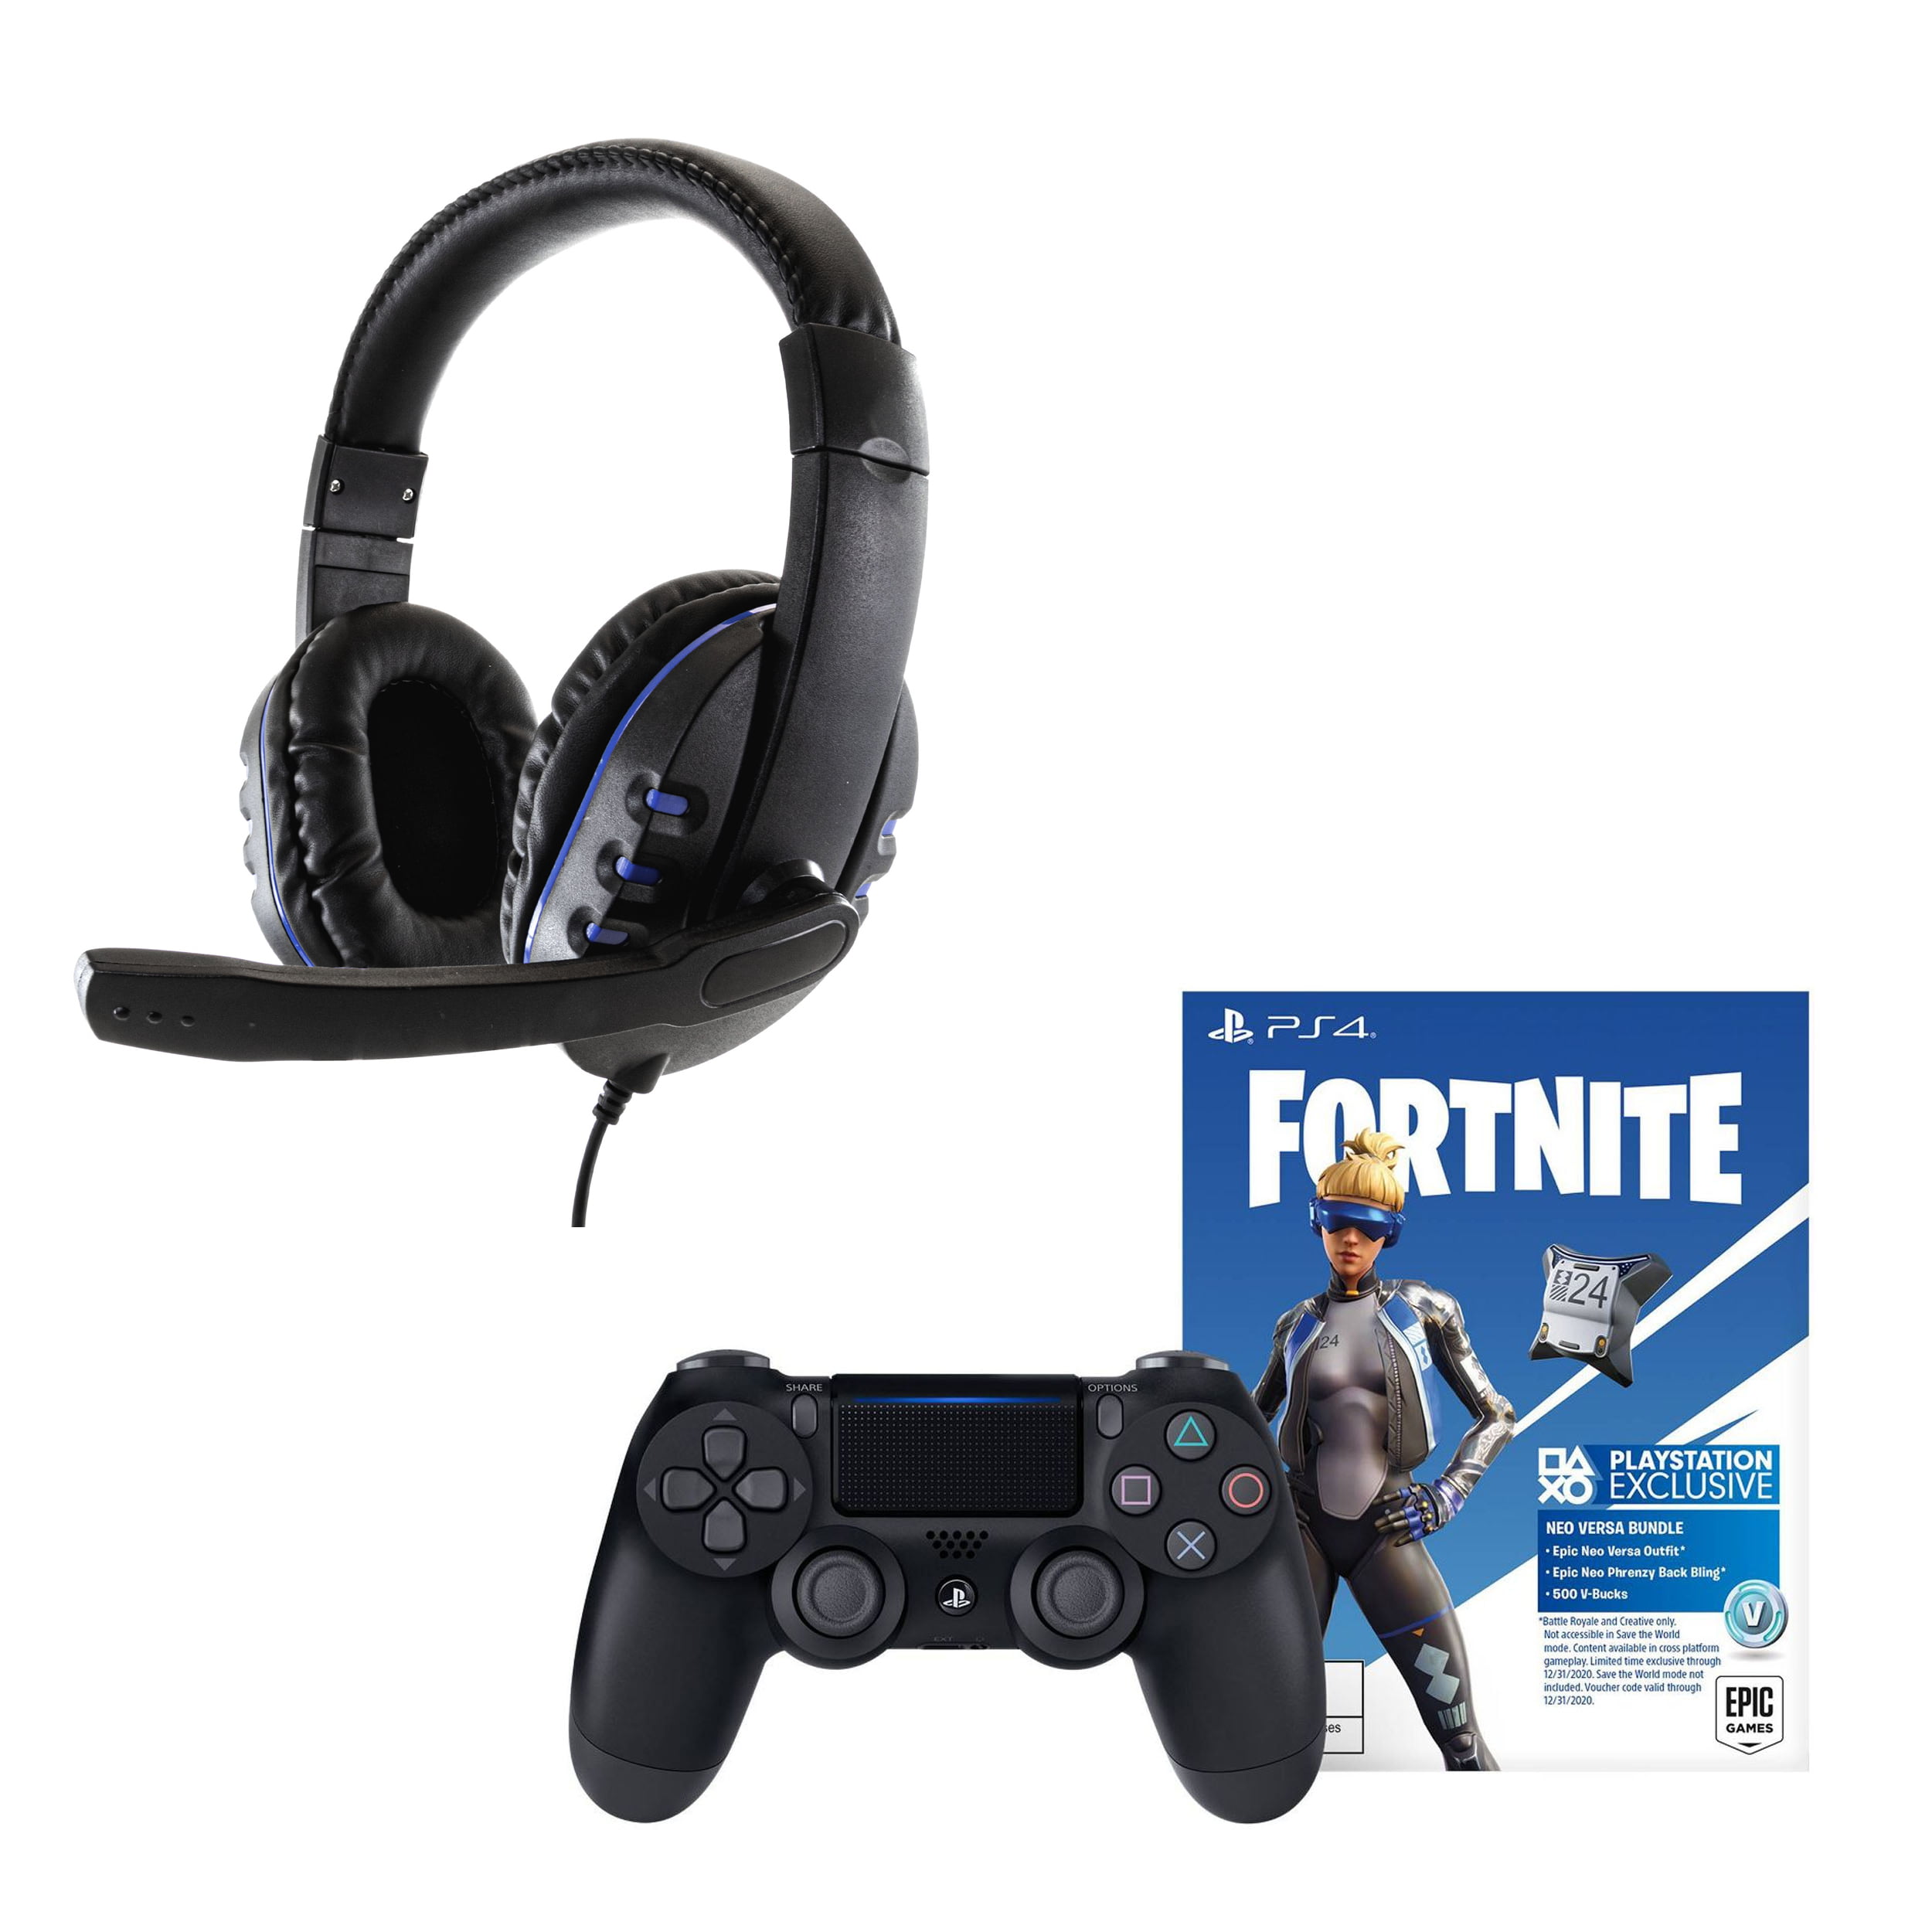 Can You Play Fortnite On A Laptop With A Ps4 Controller Playstation 4 Dual Shock Controller With Fortnite And Universal Headset Walmart Com Walmart Com